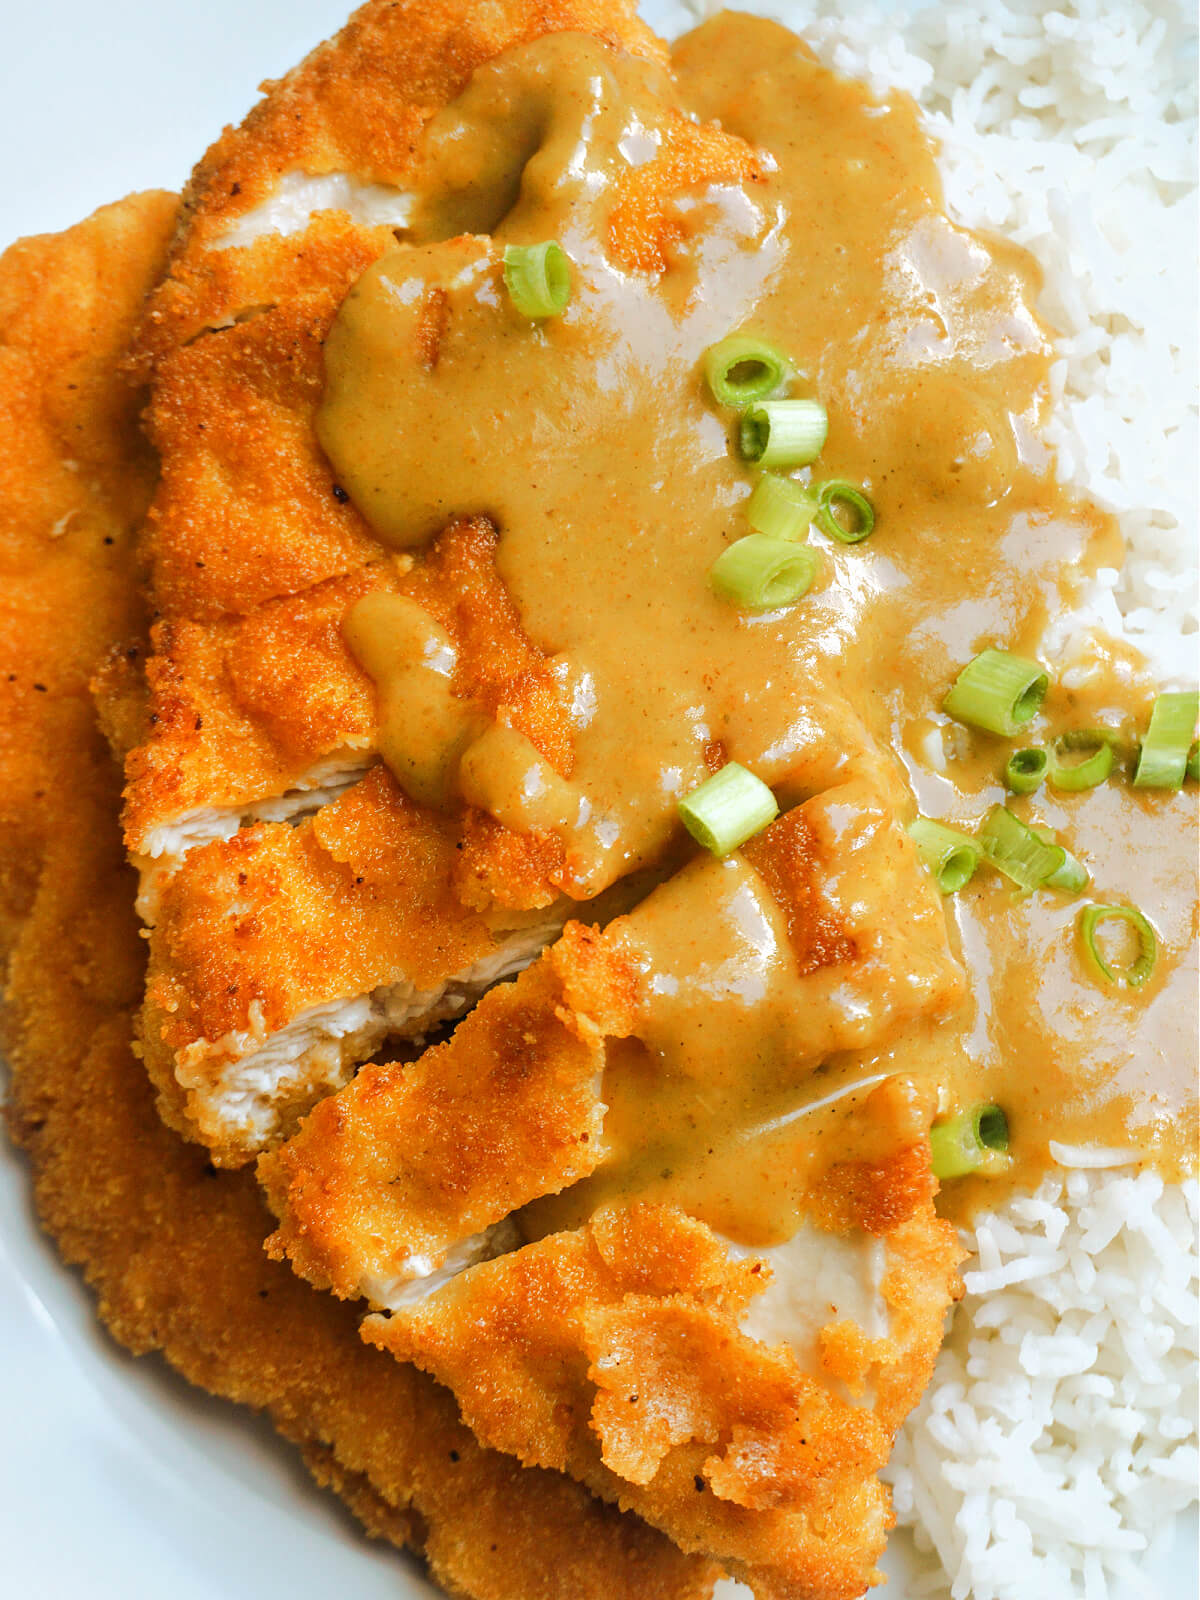 Close-up shoot of a chicken cutlet in a curry sauce over a bed of rice.